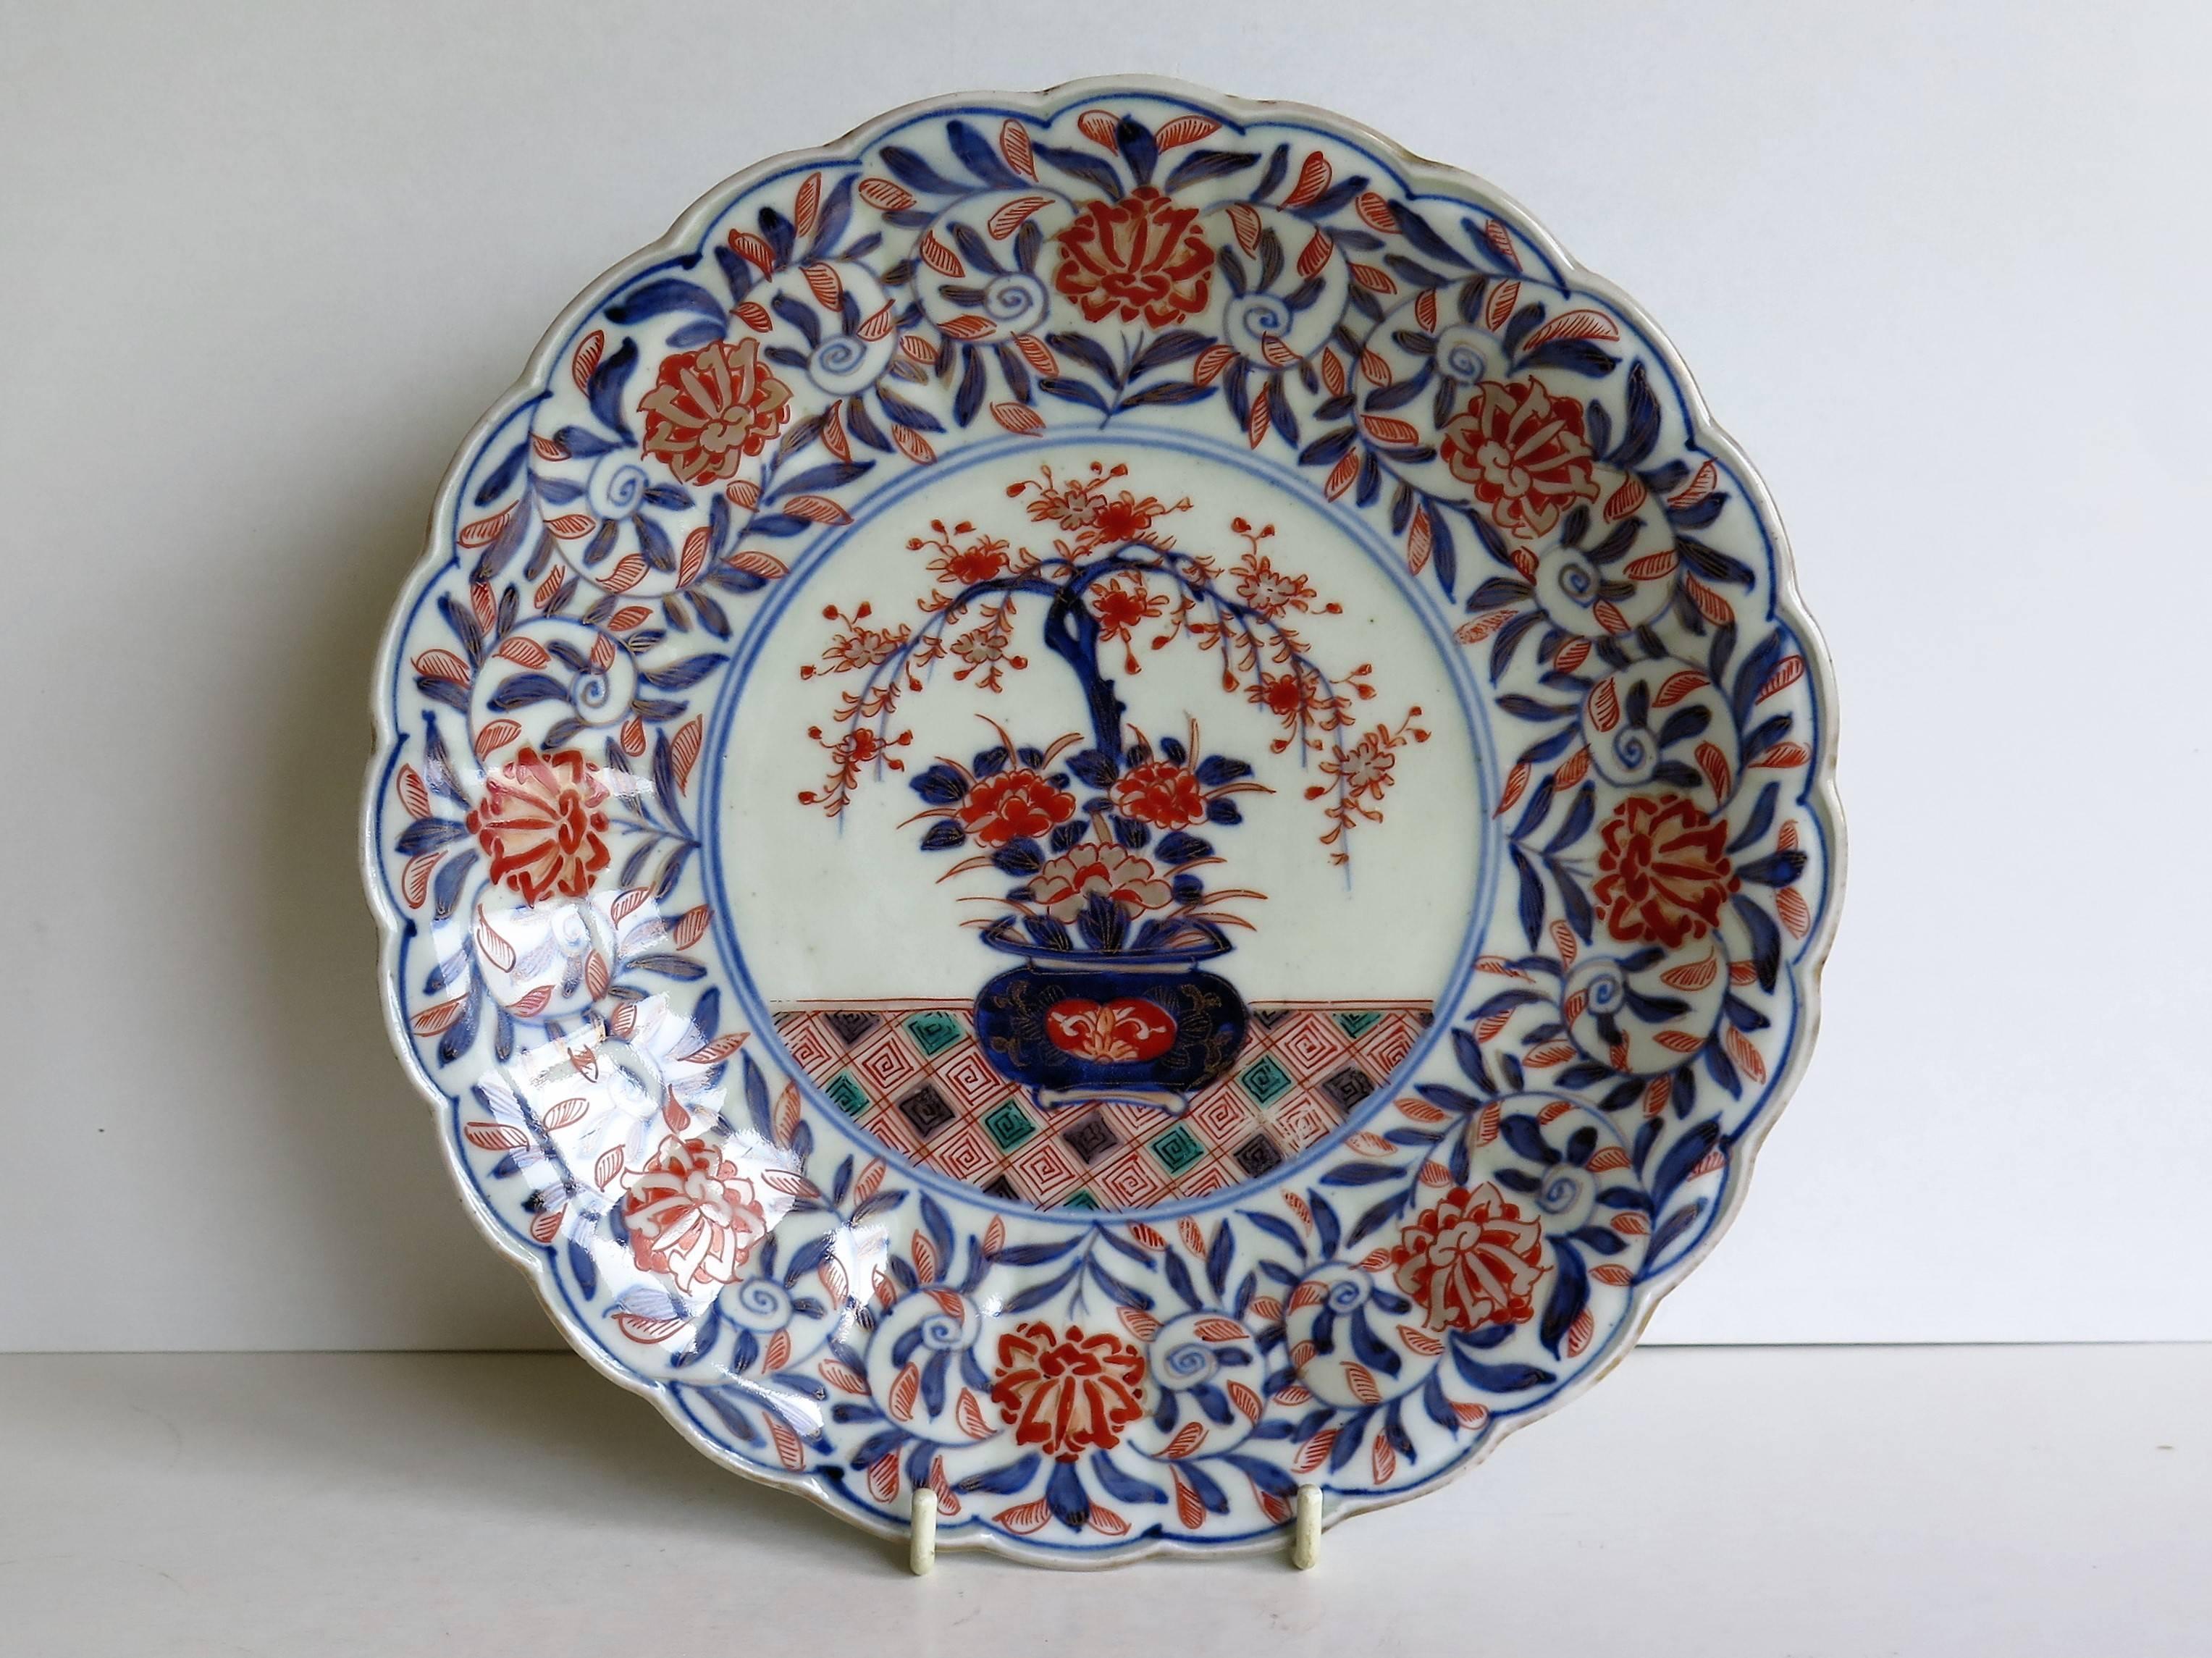 Hand-Painted Mid-19th Century Japanese Porcelain Plate or Dish, Imari Hand Enameled, Ca 1850